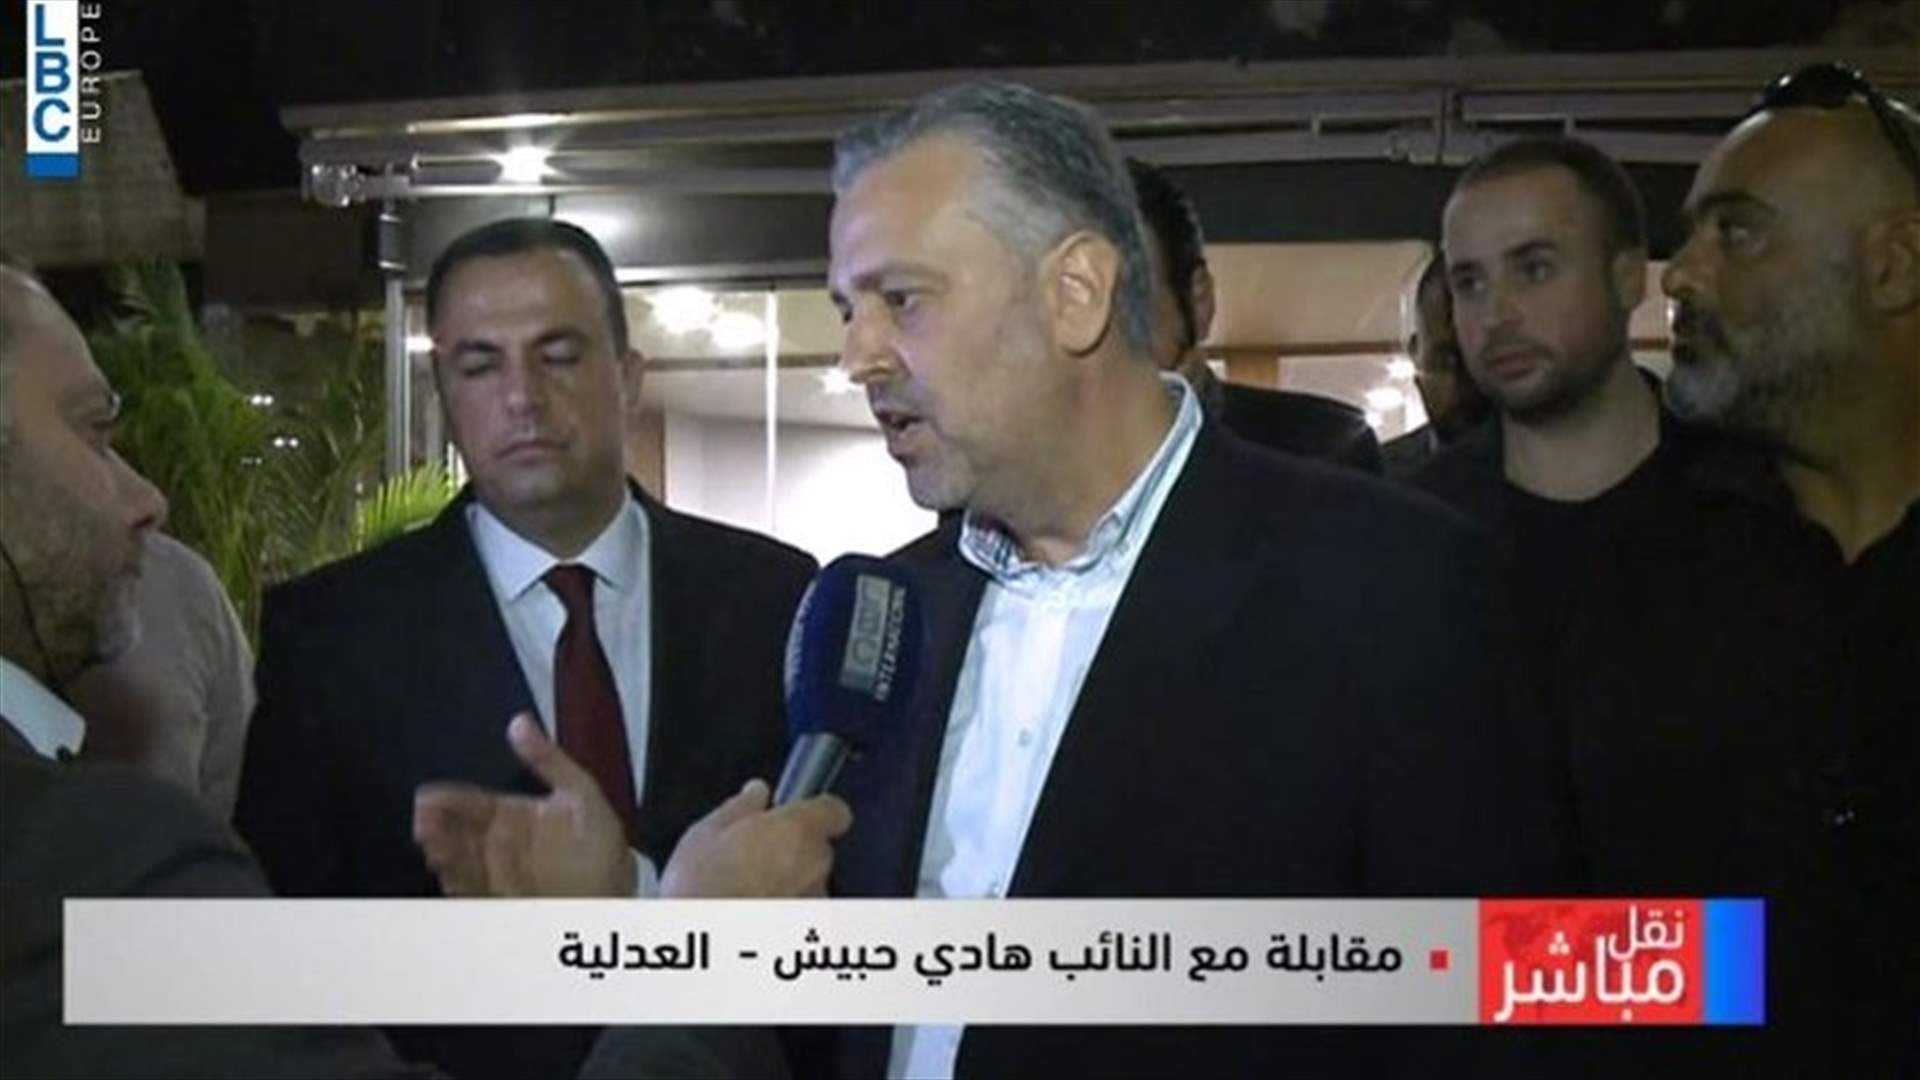 Hbeish to LBCI: I filed a complaint before Supreme Judicial Council exposing all legal violations committed by Judge Aoun